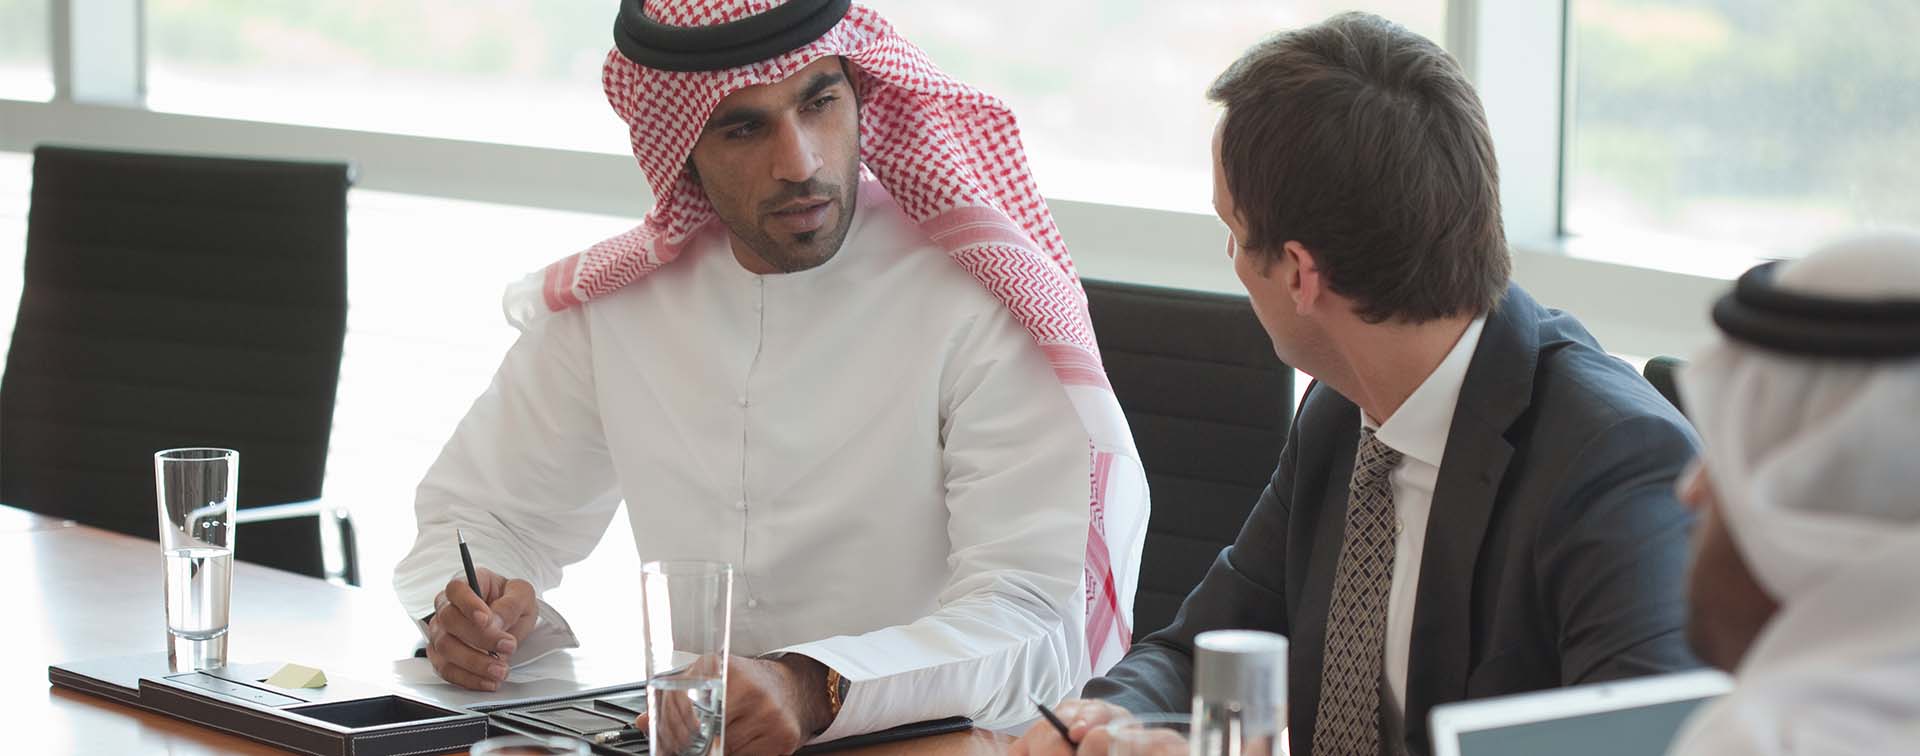 Three businessmen in discussion around a boardroom table, two in Arabic attire and one in a traditional suit